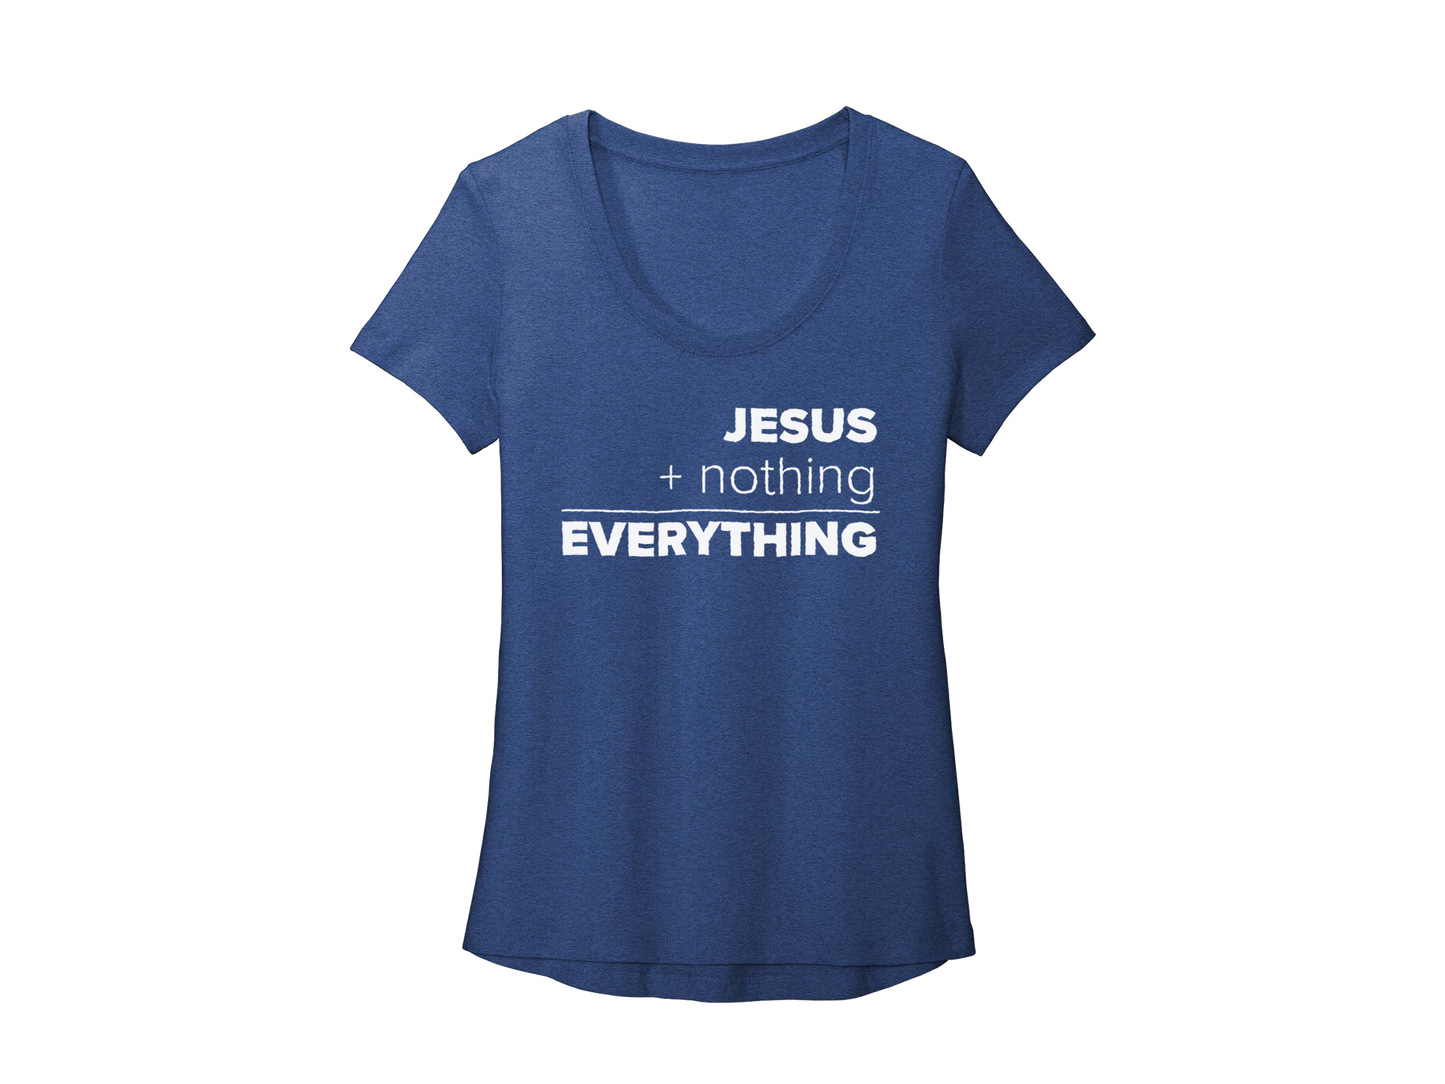 JESUS EQUALS EVERYTHING WOMEN'S BLUE FRONT- CHRISTIAN T-SHIRT